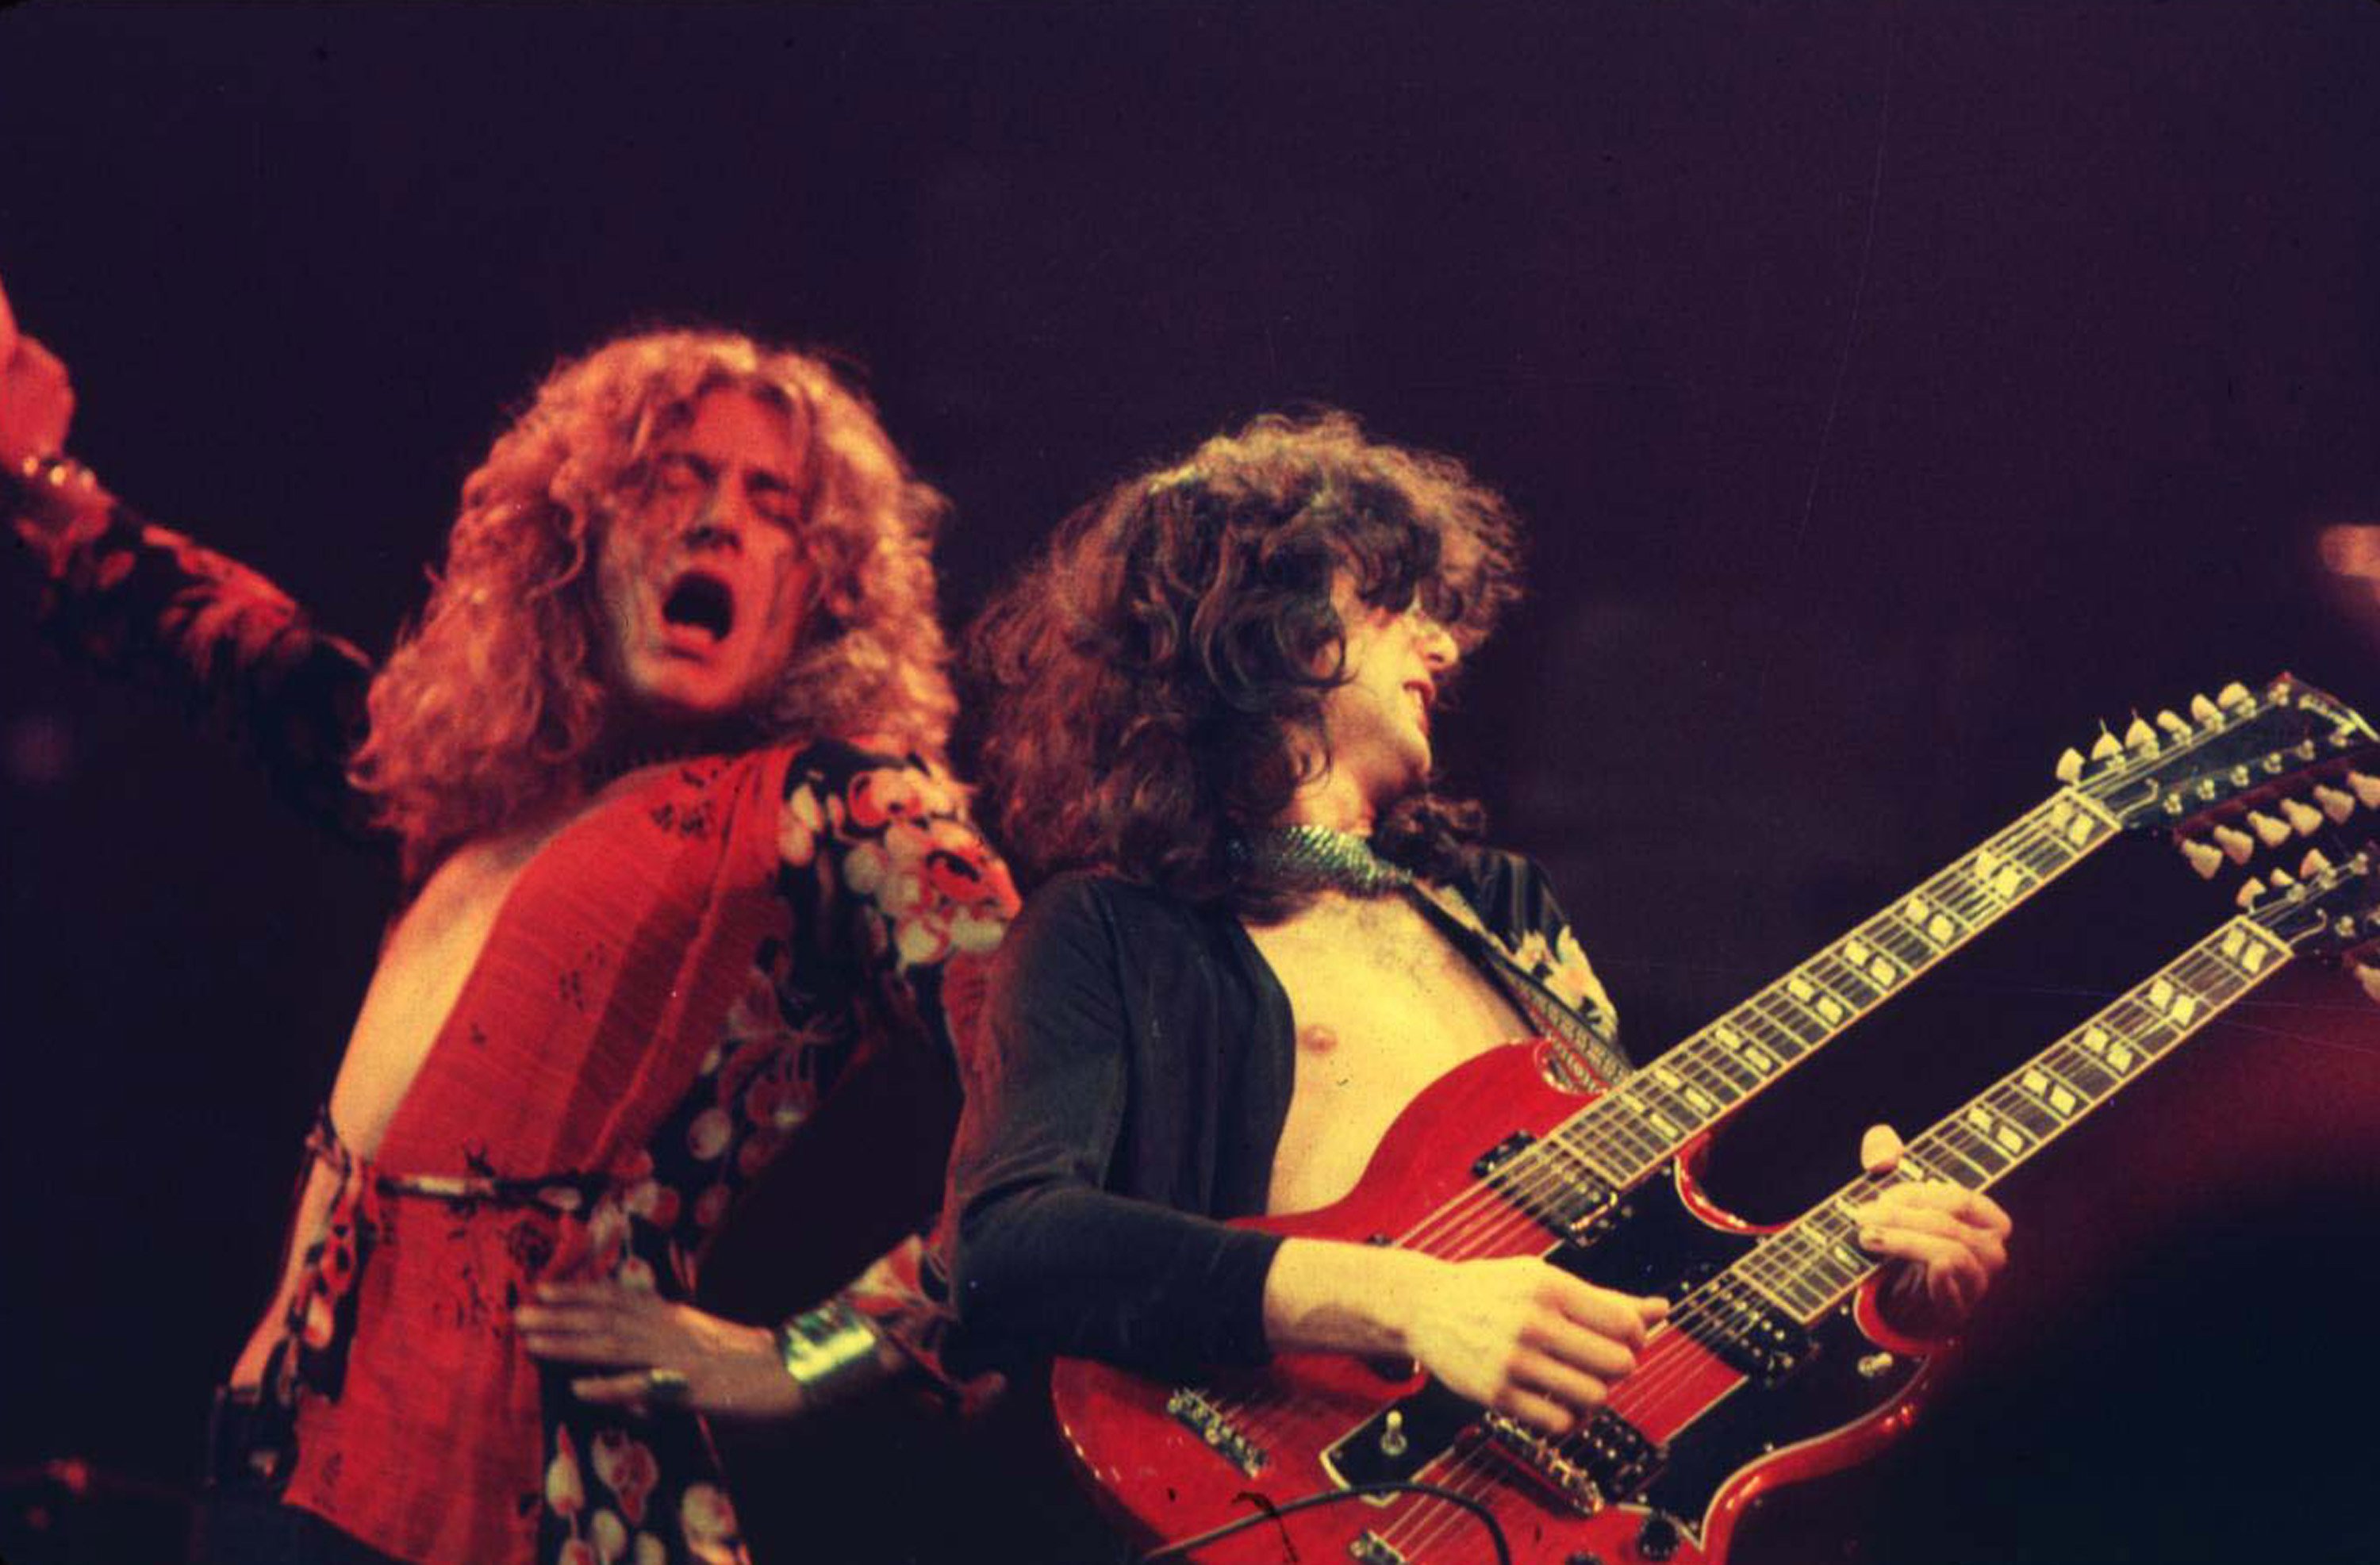 Robert Plant and Jimmy Page of Led Zeppelin perform in Chicago, Illinois